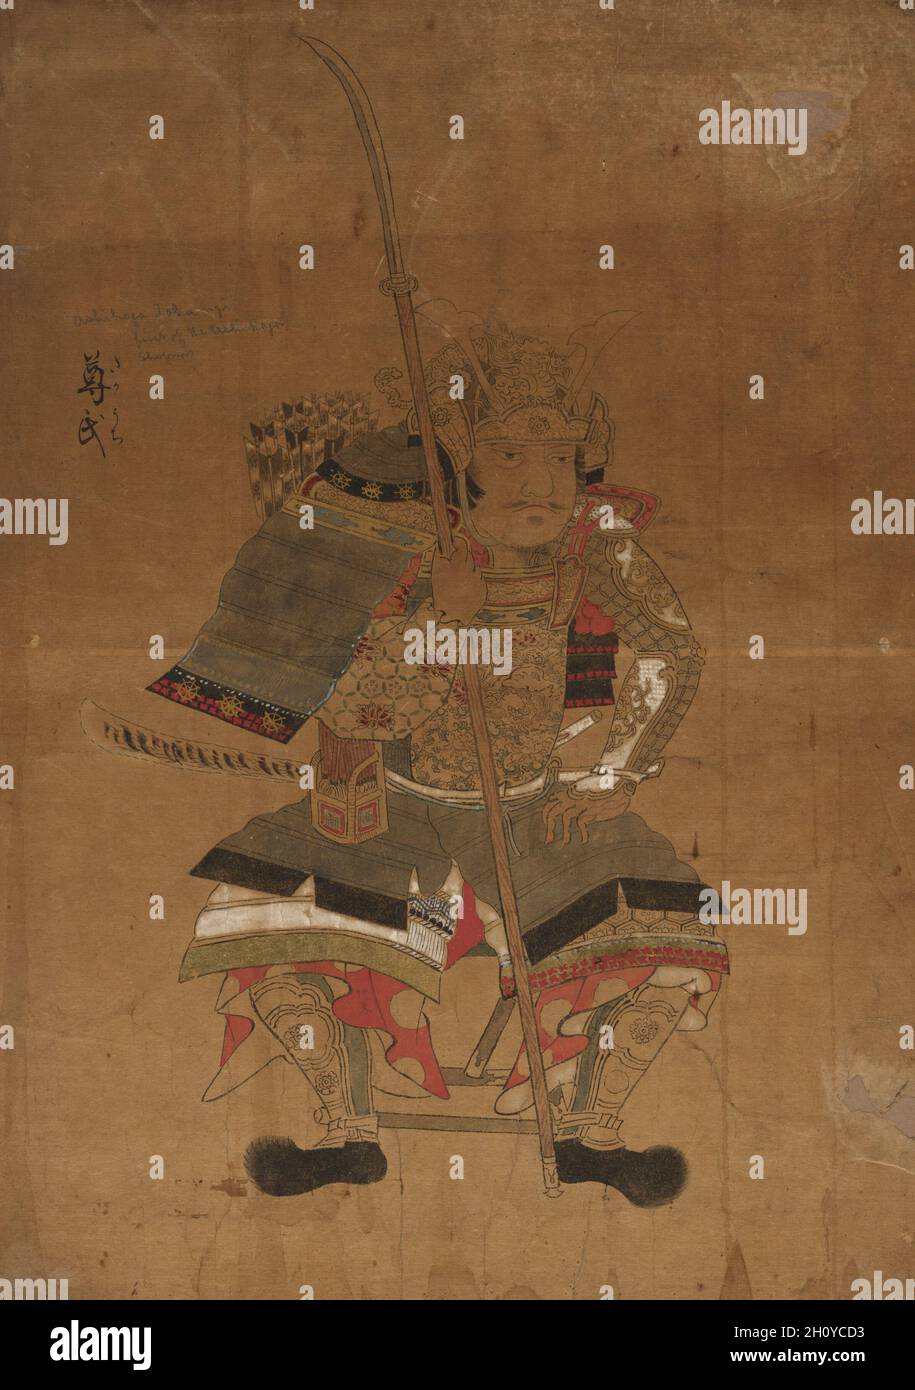 Sketch Model for Portraits of Ashikaga Takauji, 1615-1868. Japan, Edo period (1615-1868). Ink and color on paper; overall: 38.8 x 55 cm (15 1/4 x 21 5/8 in.). Stock Photo